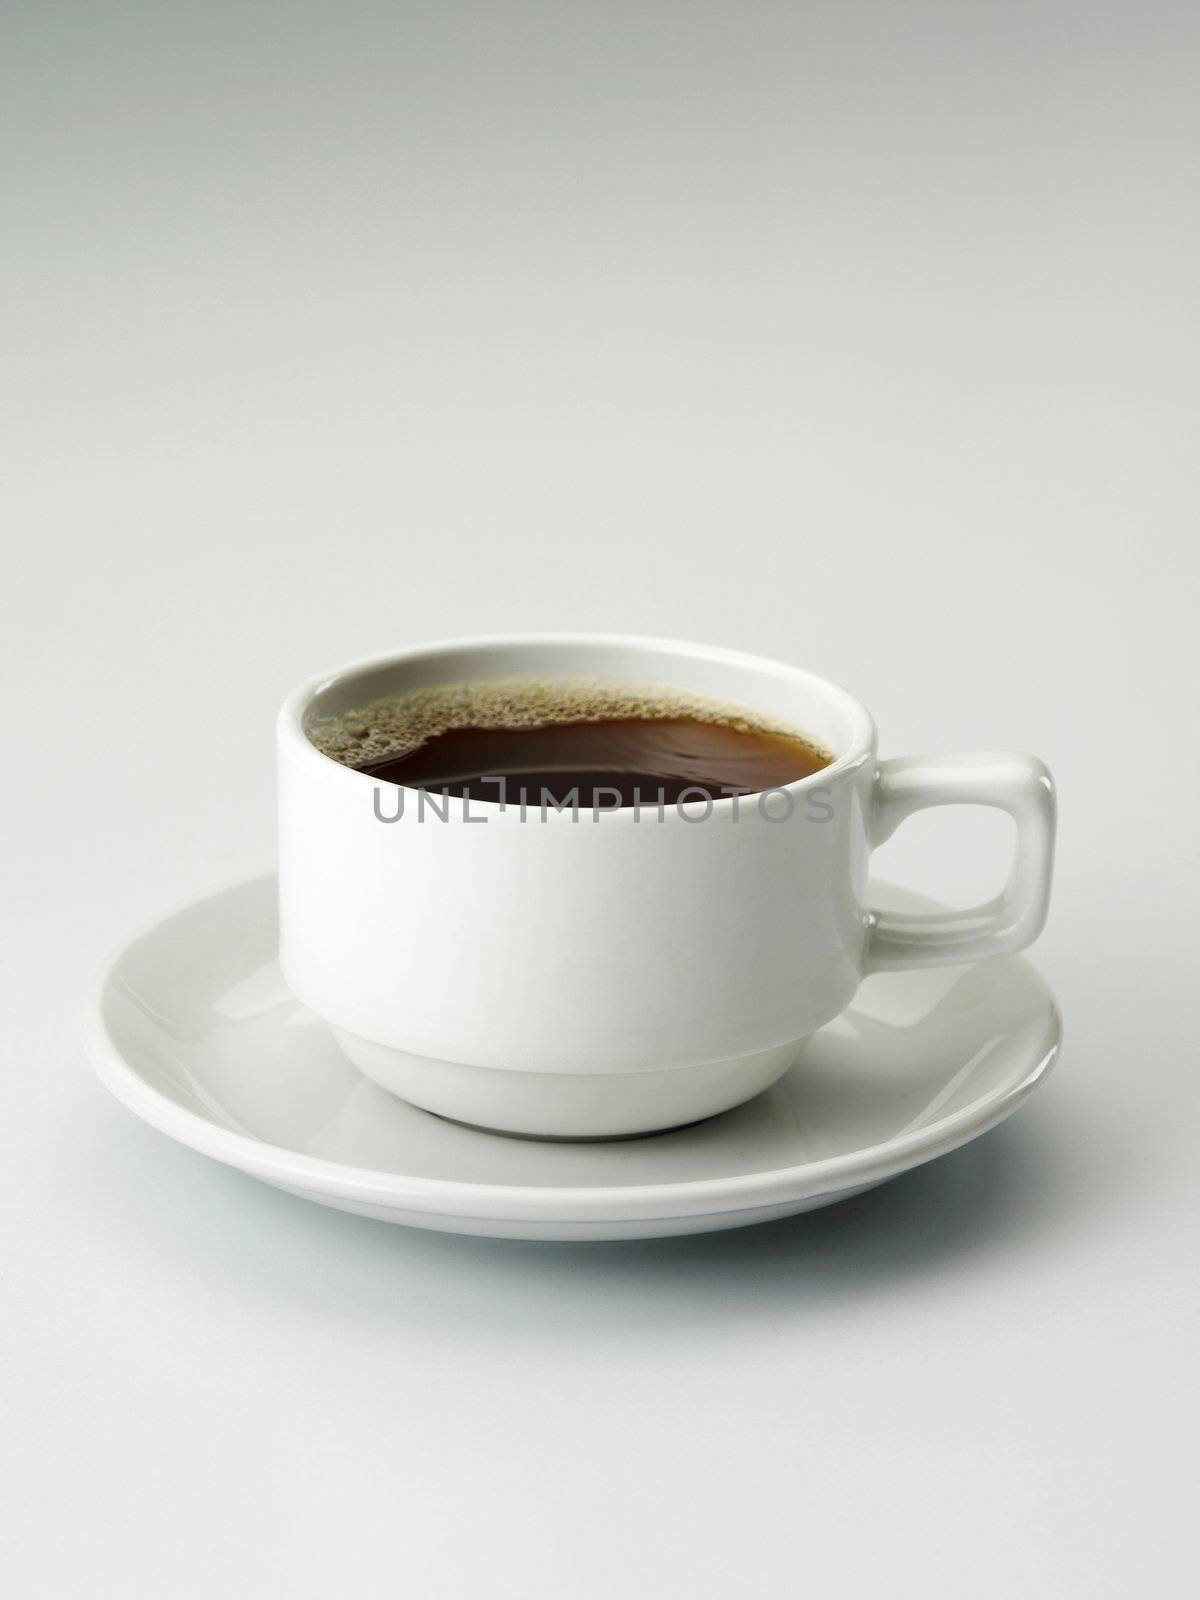 close up of a cup with tea on the plain background